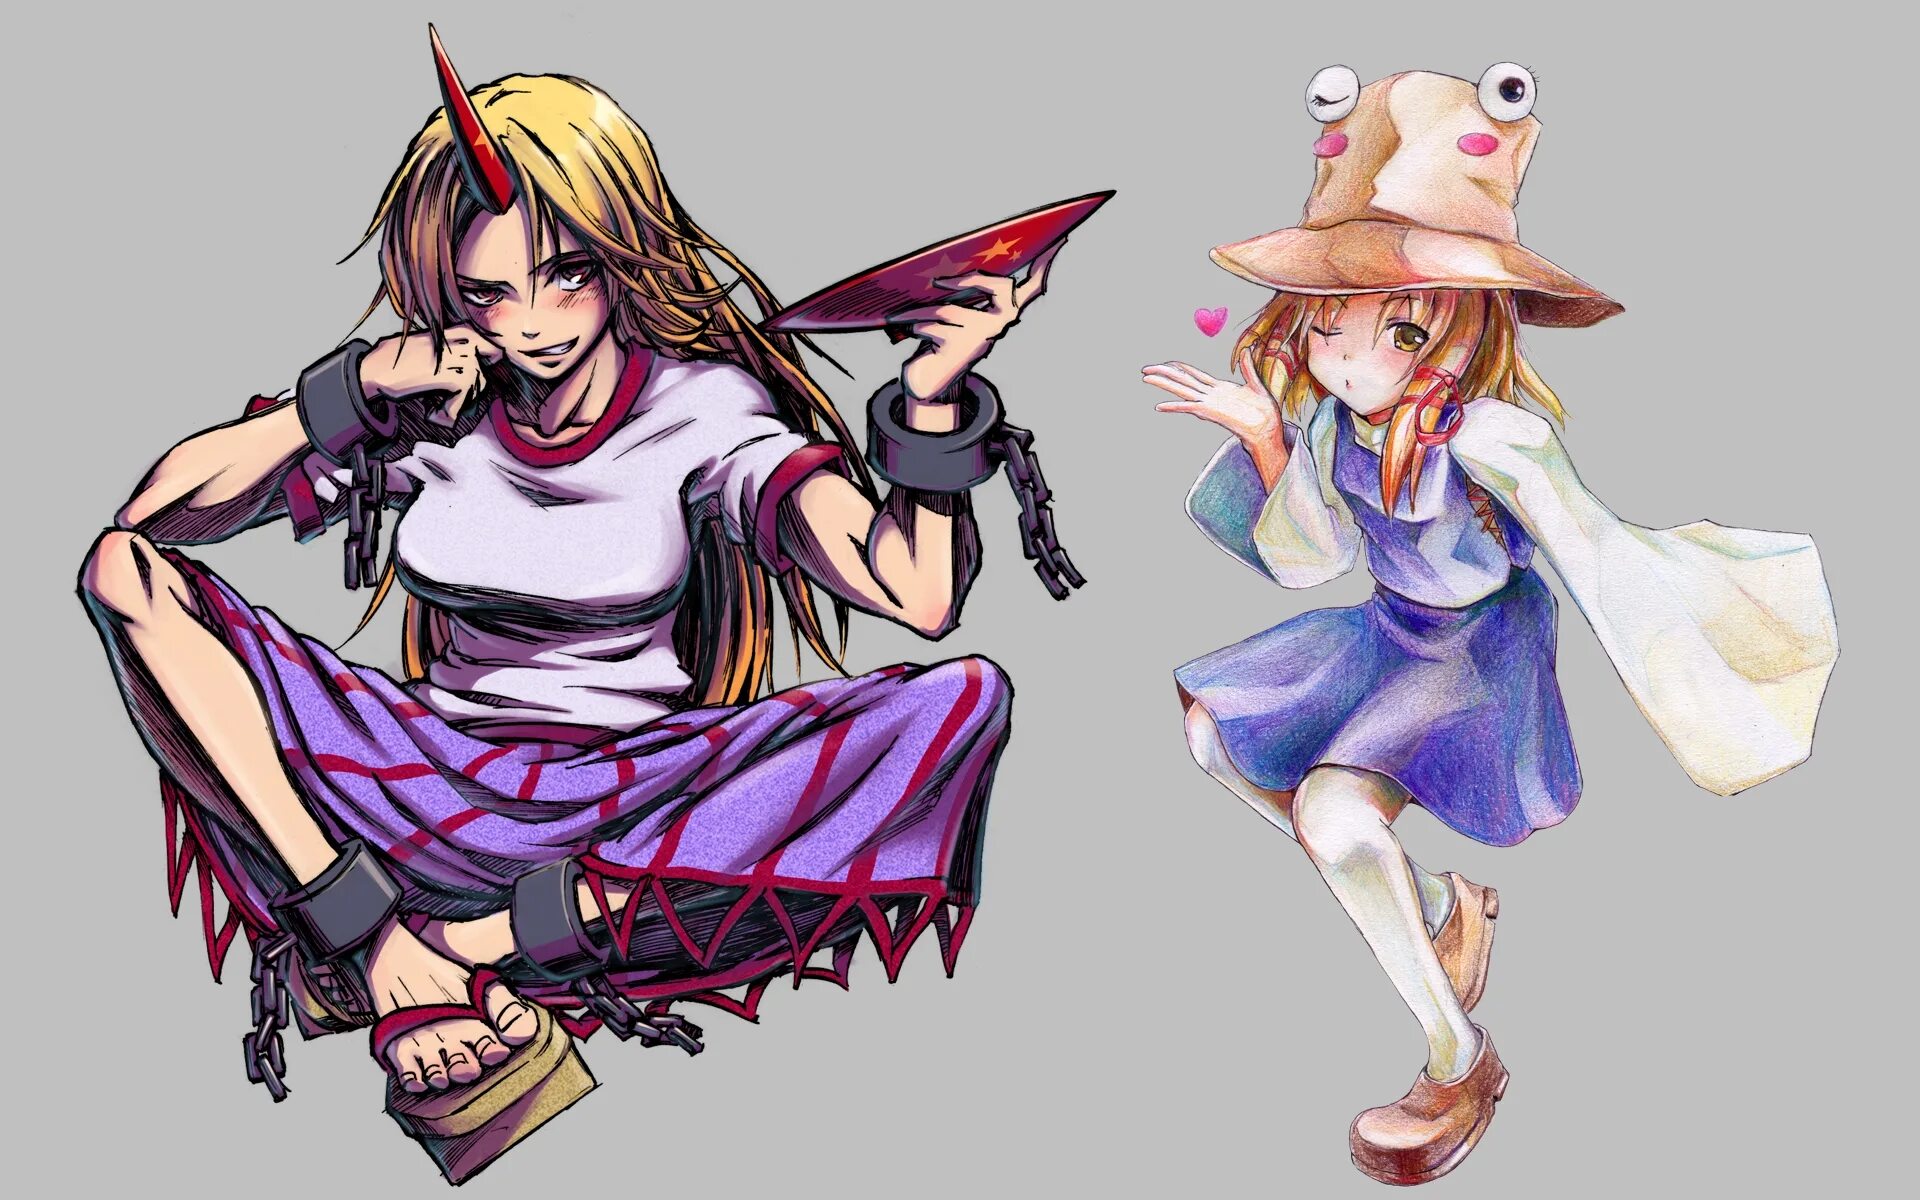 Touhou summer days dream. Touhou Summer Day's Dream. Touhou Dream. Touhou Dreamcast.